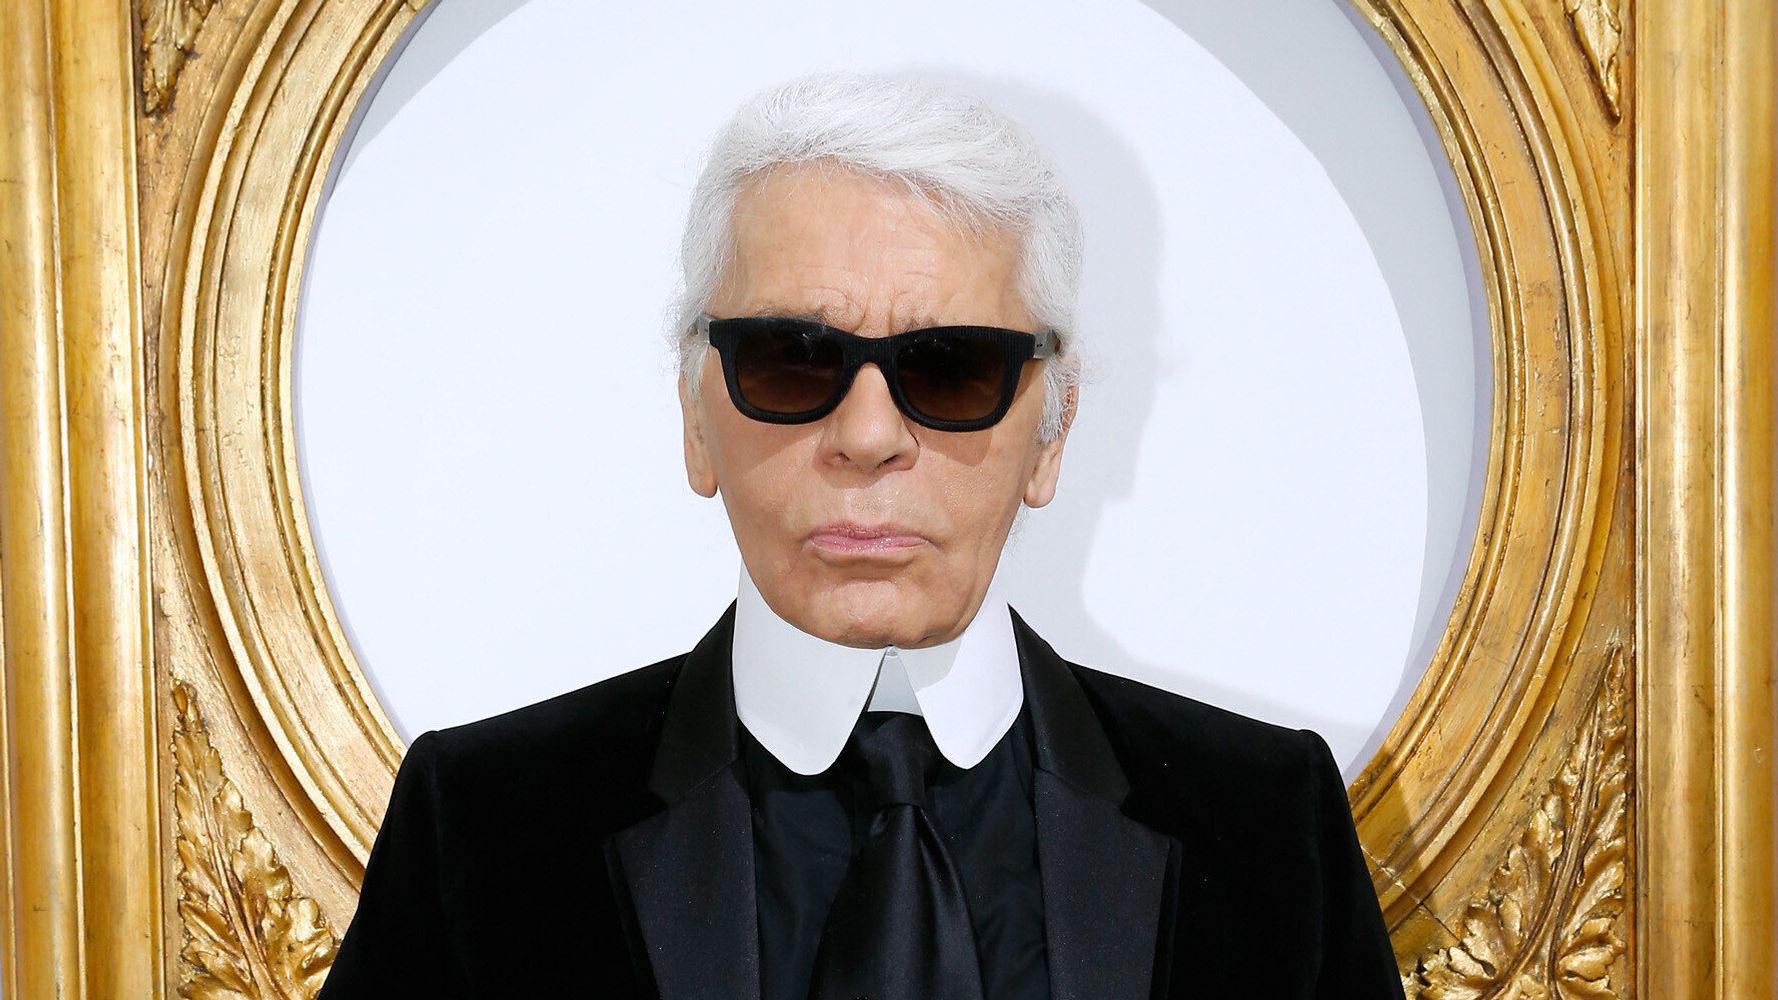 Curvy French women blast Karl Lagerfeld for anti-fat comments -  Luxurylaunches